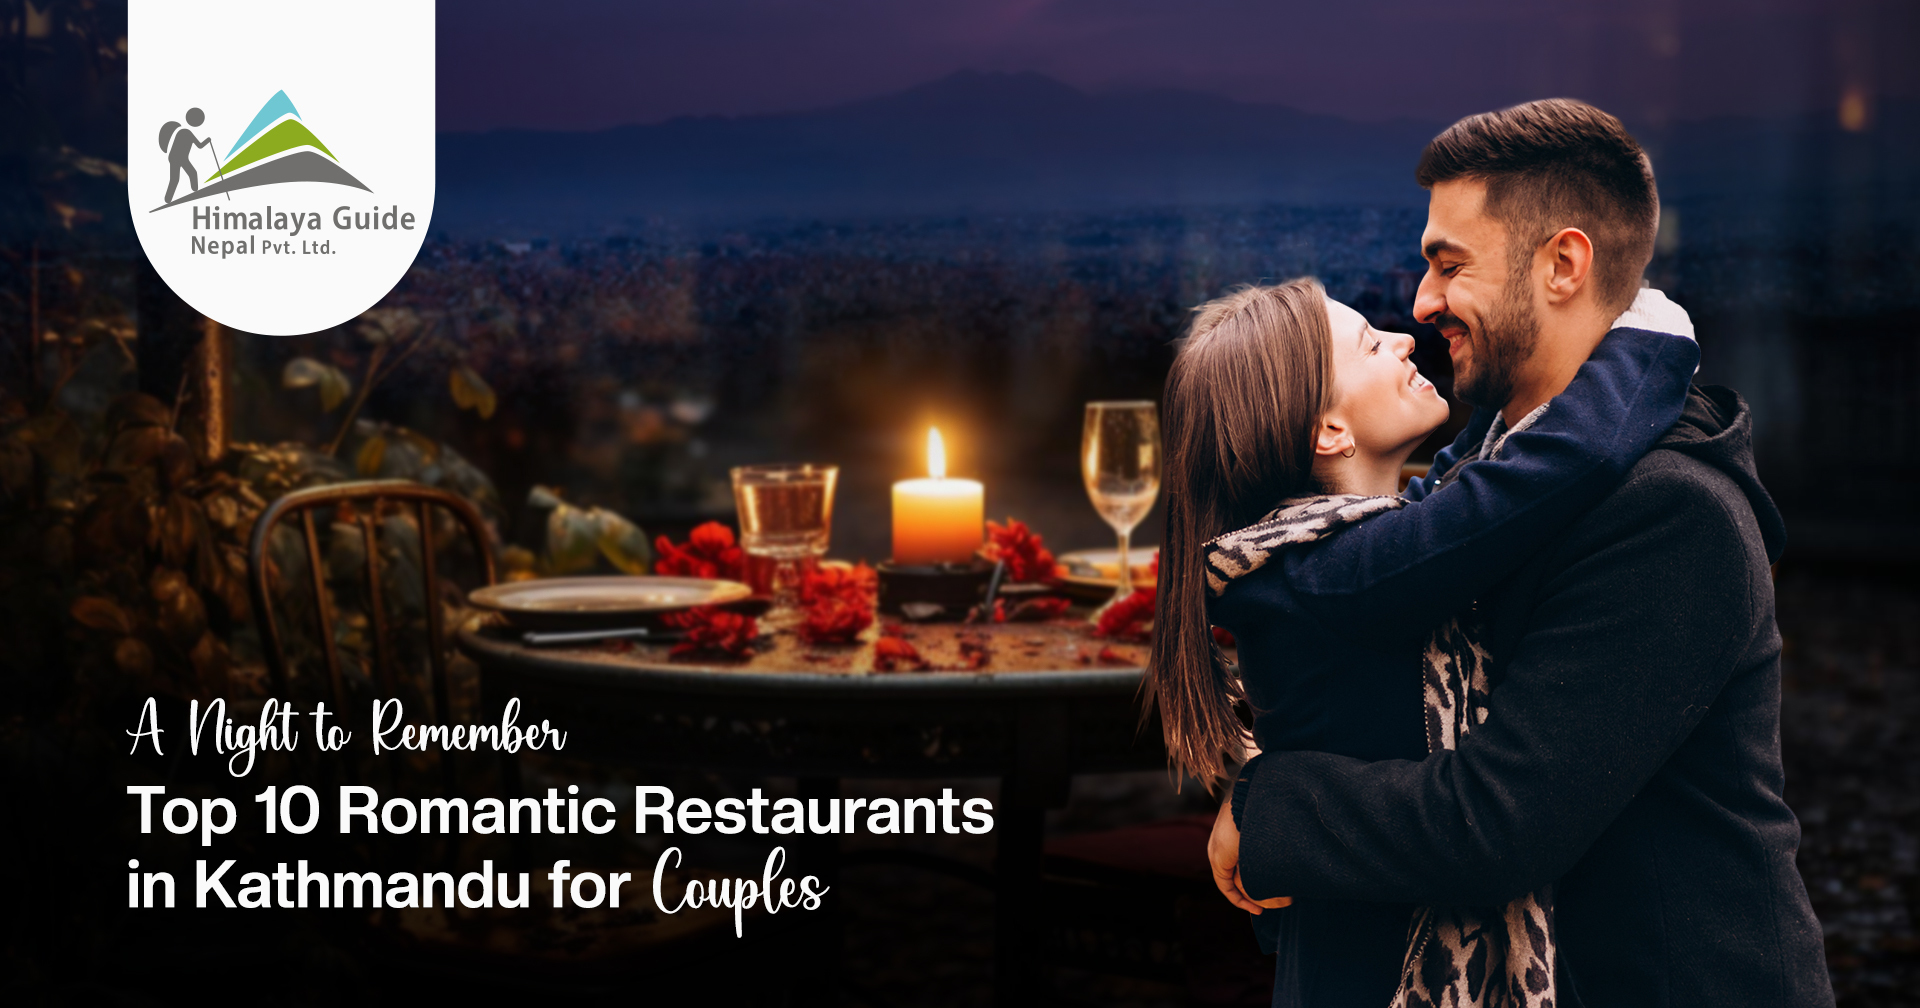 A Night to Remember: Top 10 Romantic Restaurants in Kathmandu for Couples